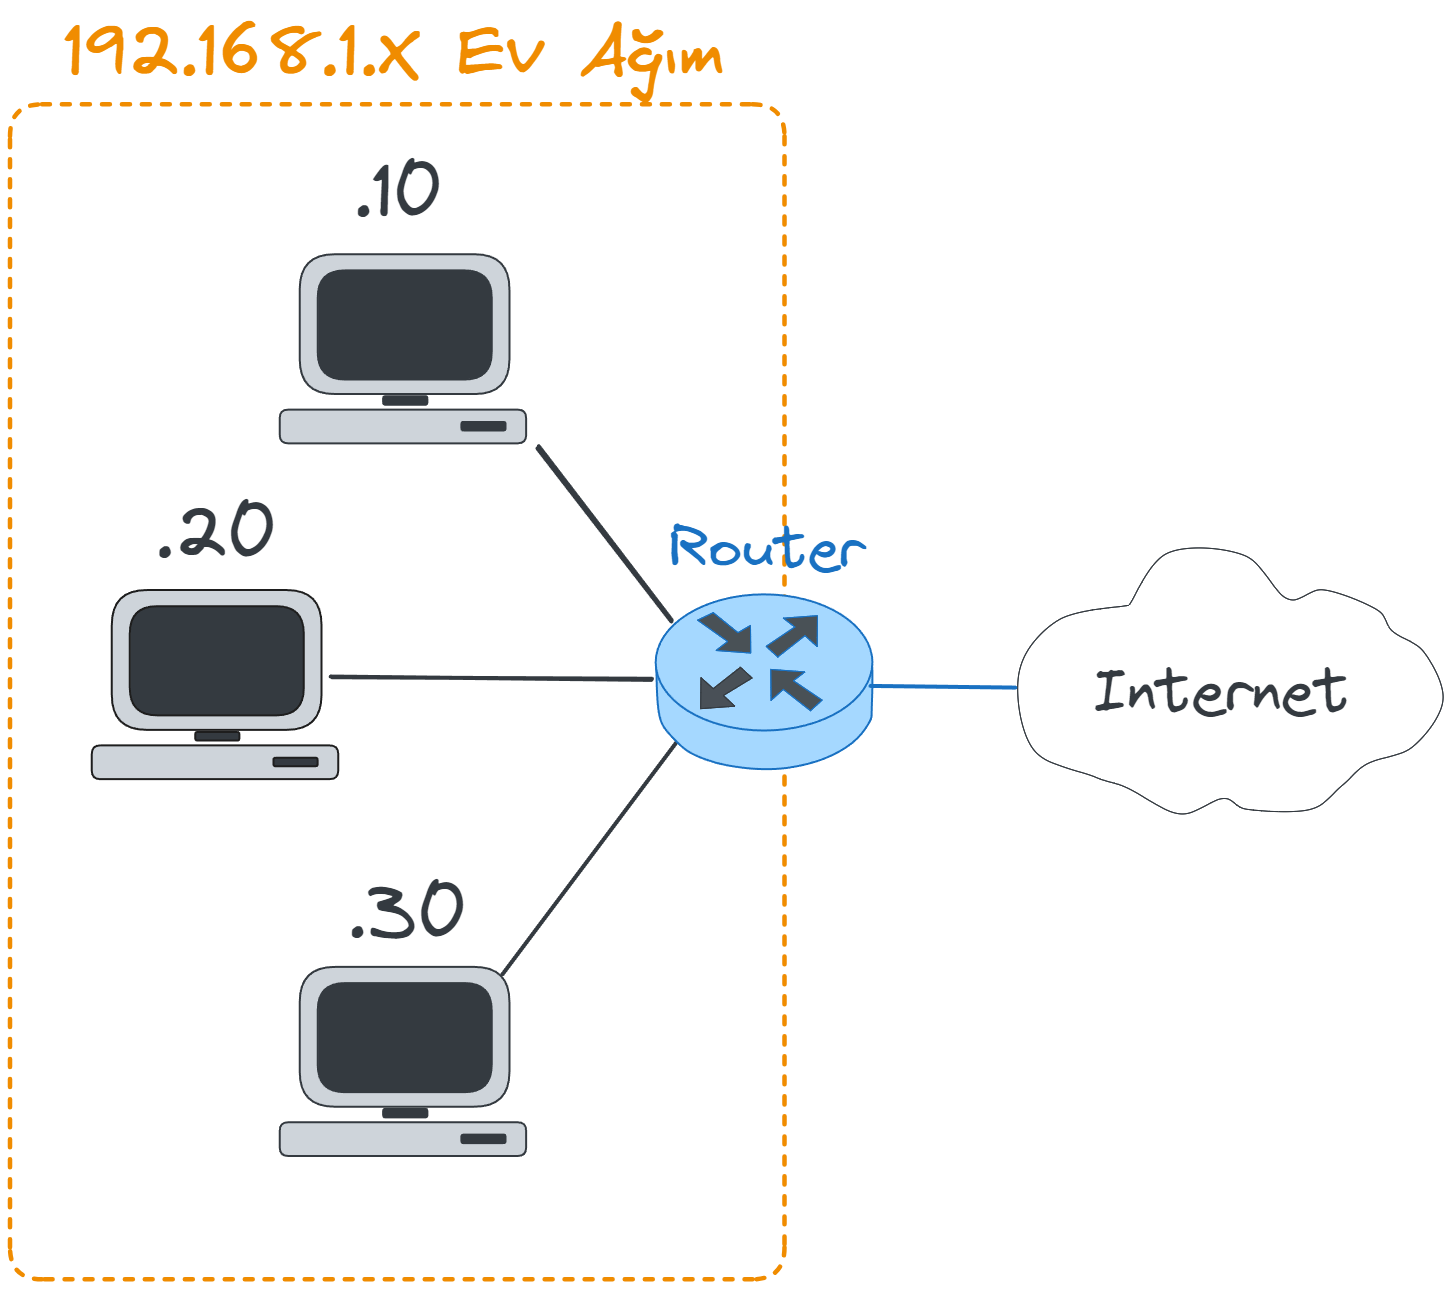 LAN-to-WAN-with-router.webp